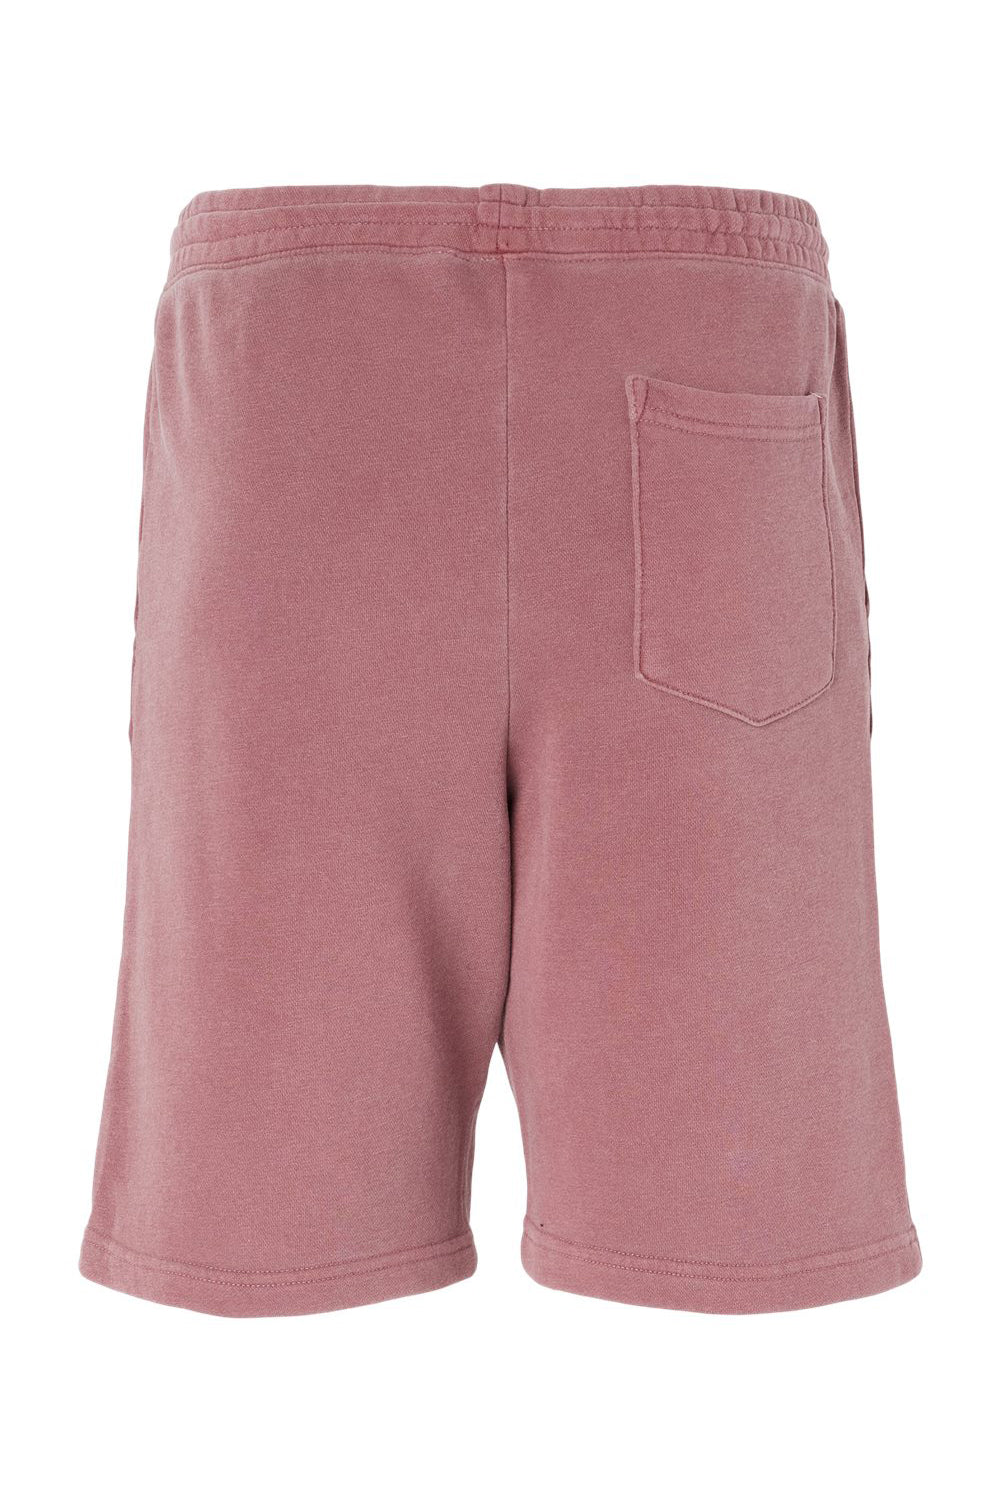 Independent Trading Co. PRM50STPD Mens Pigment Dyed Fleece Shorts w/ Pockets Maroon Flat Back